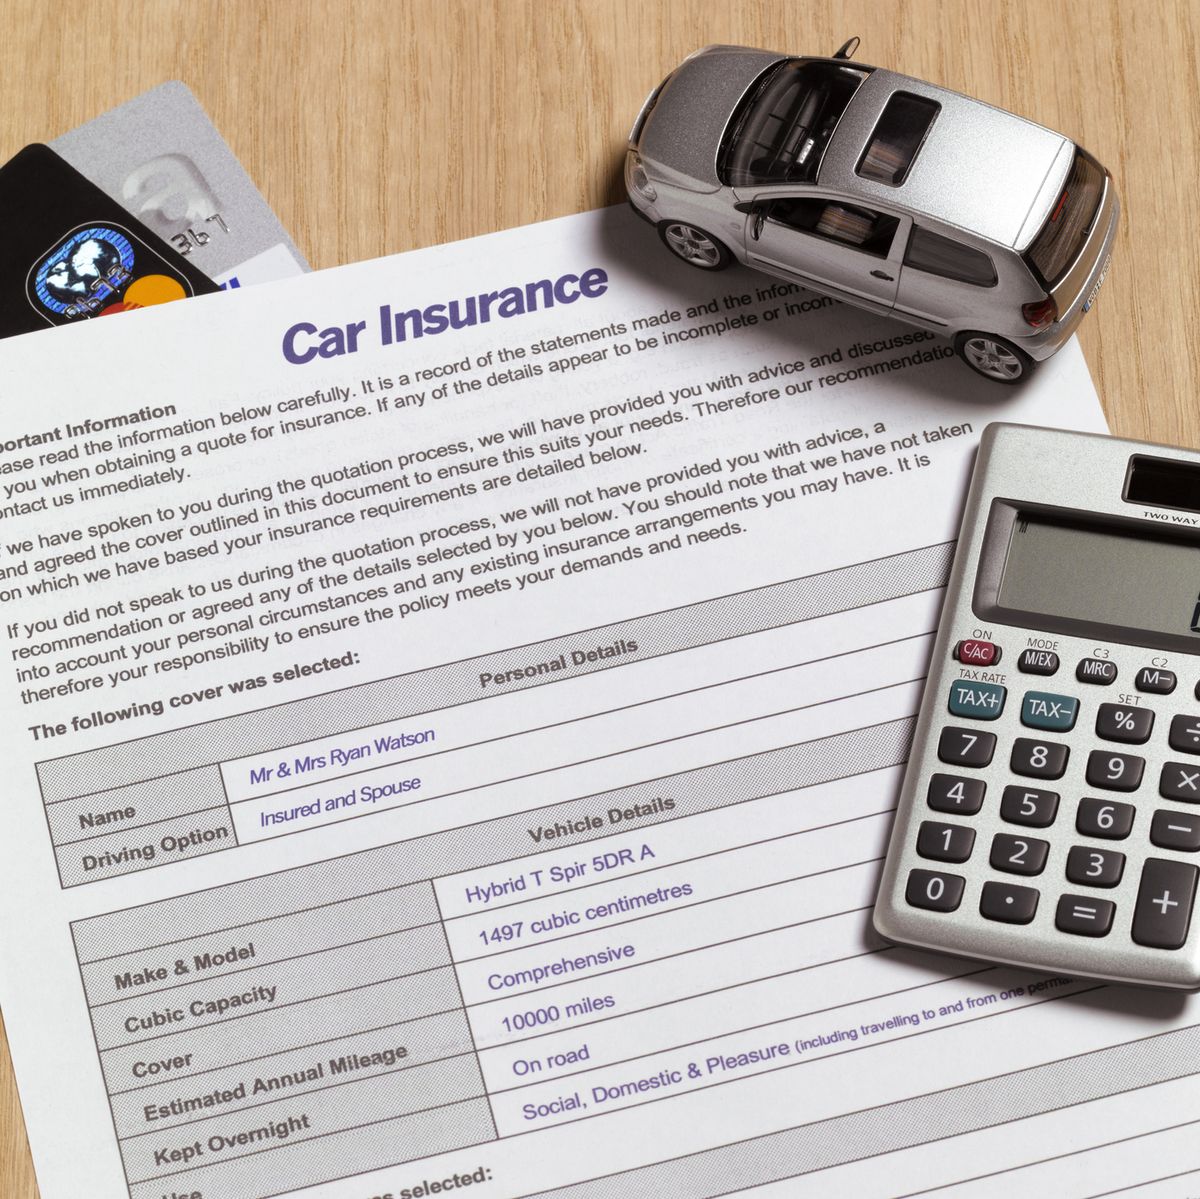 When Do You Pay the Deductible for Car Insurance?